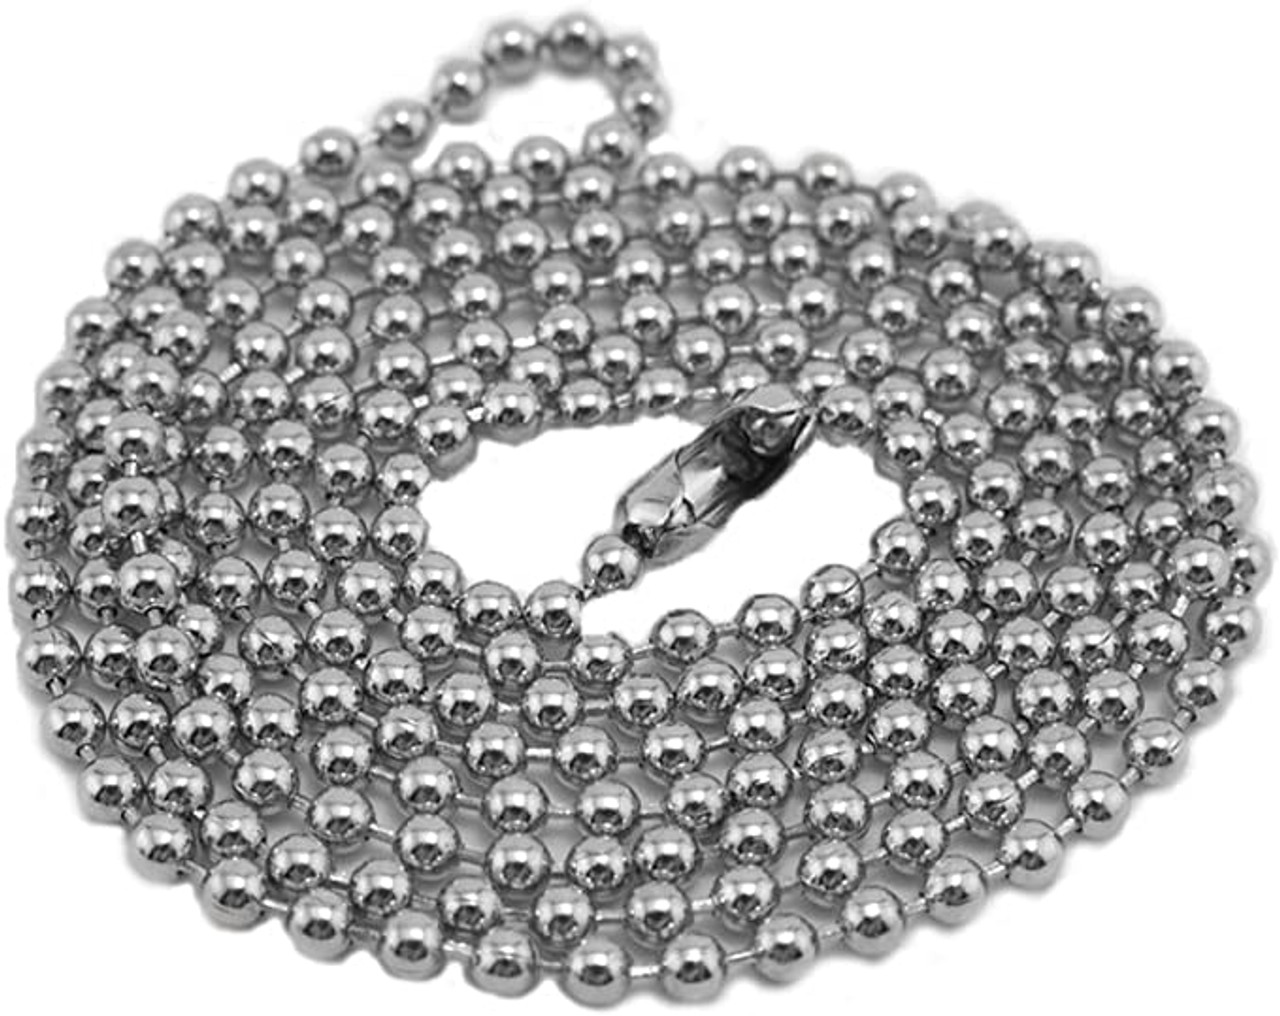 Nickel Plated Beaded Neck Chain ID Badge Holders - 30 Inch Long